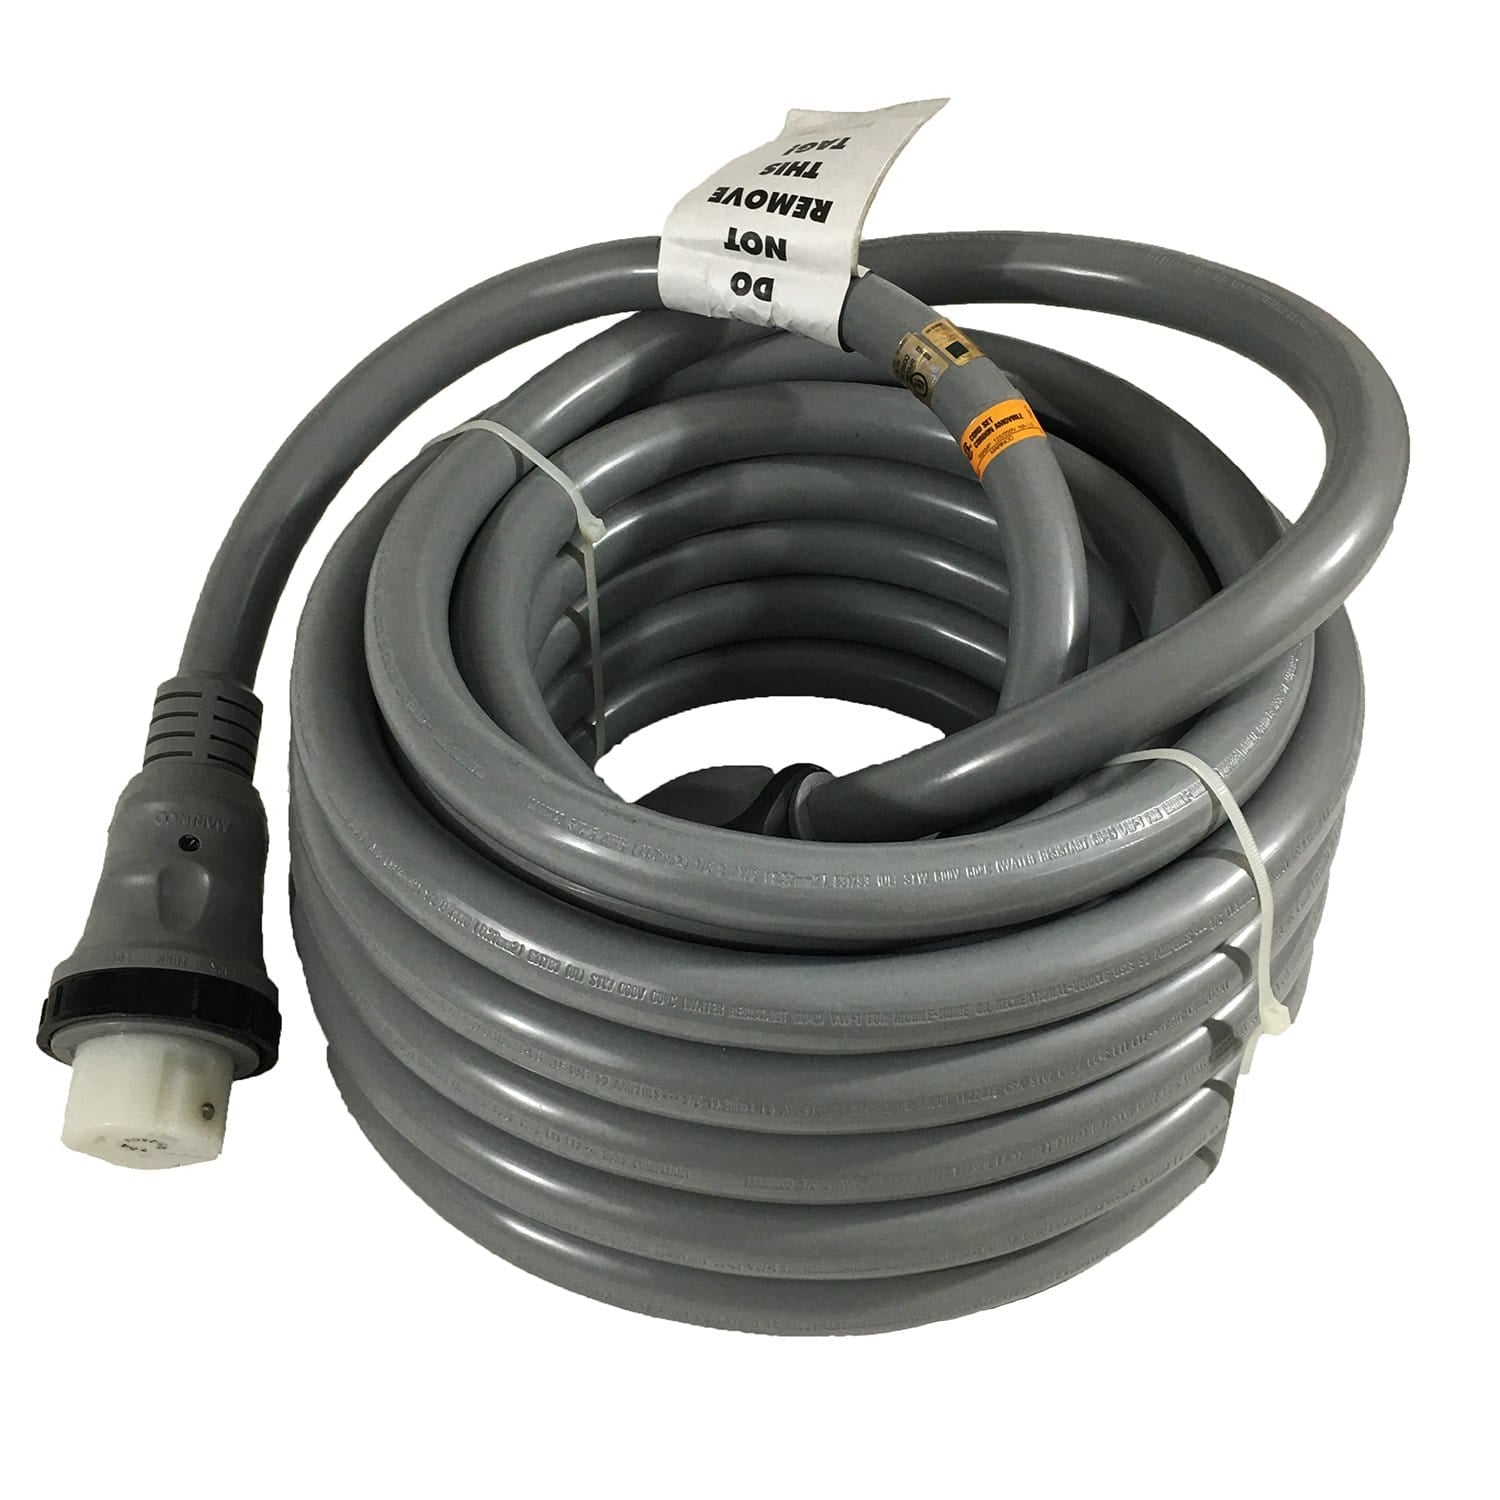 Park Power 6152SPPGRV-50 50' Extension Power Cord with Handle Grip (50A Straight Male x 50A Locking Female)